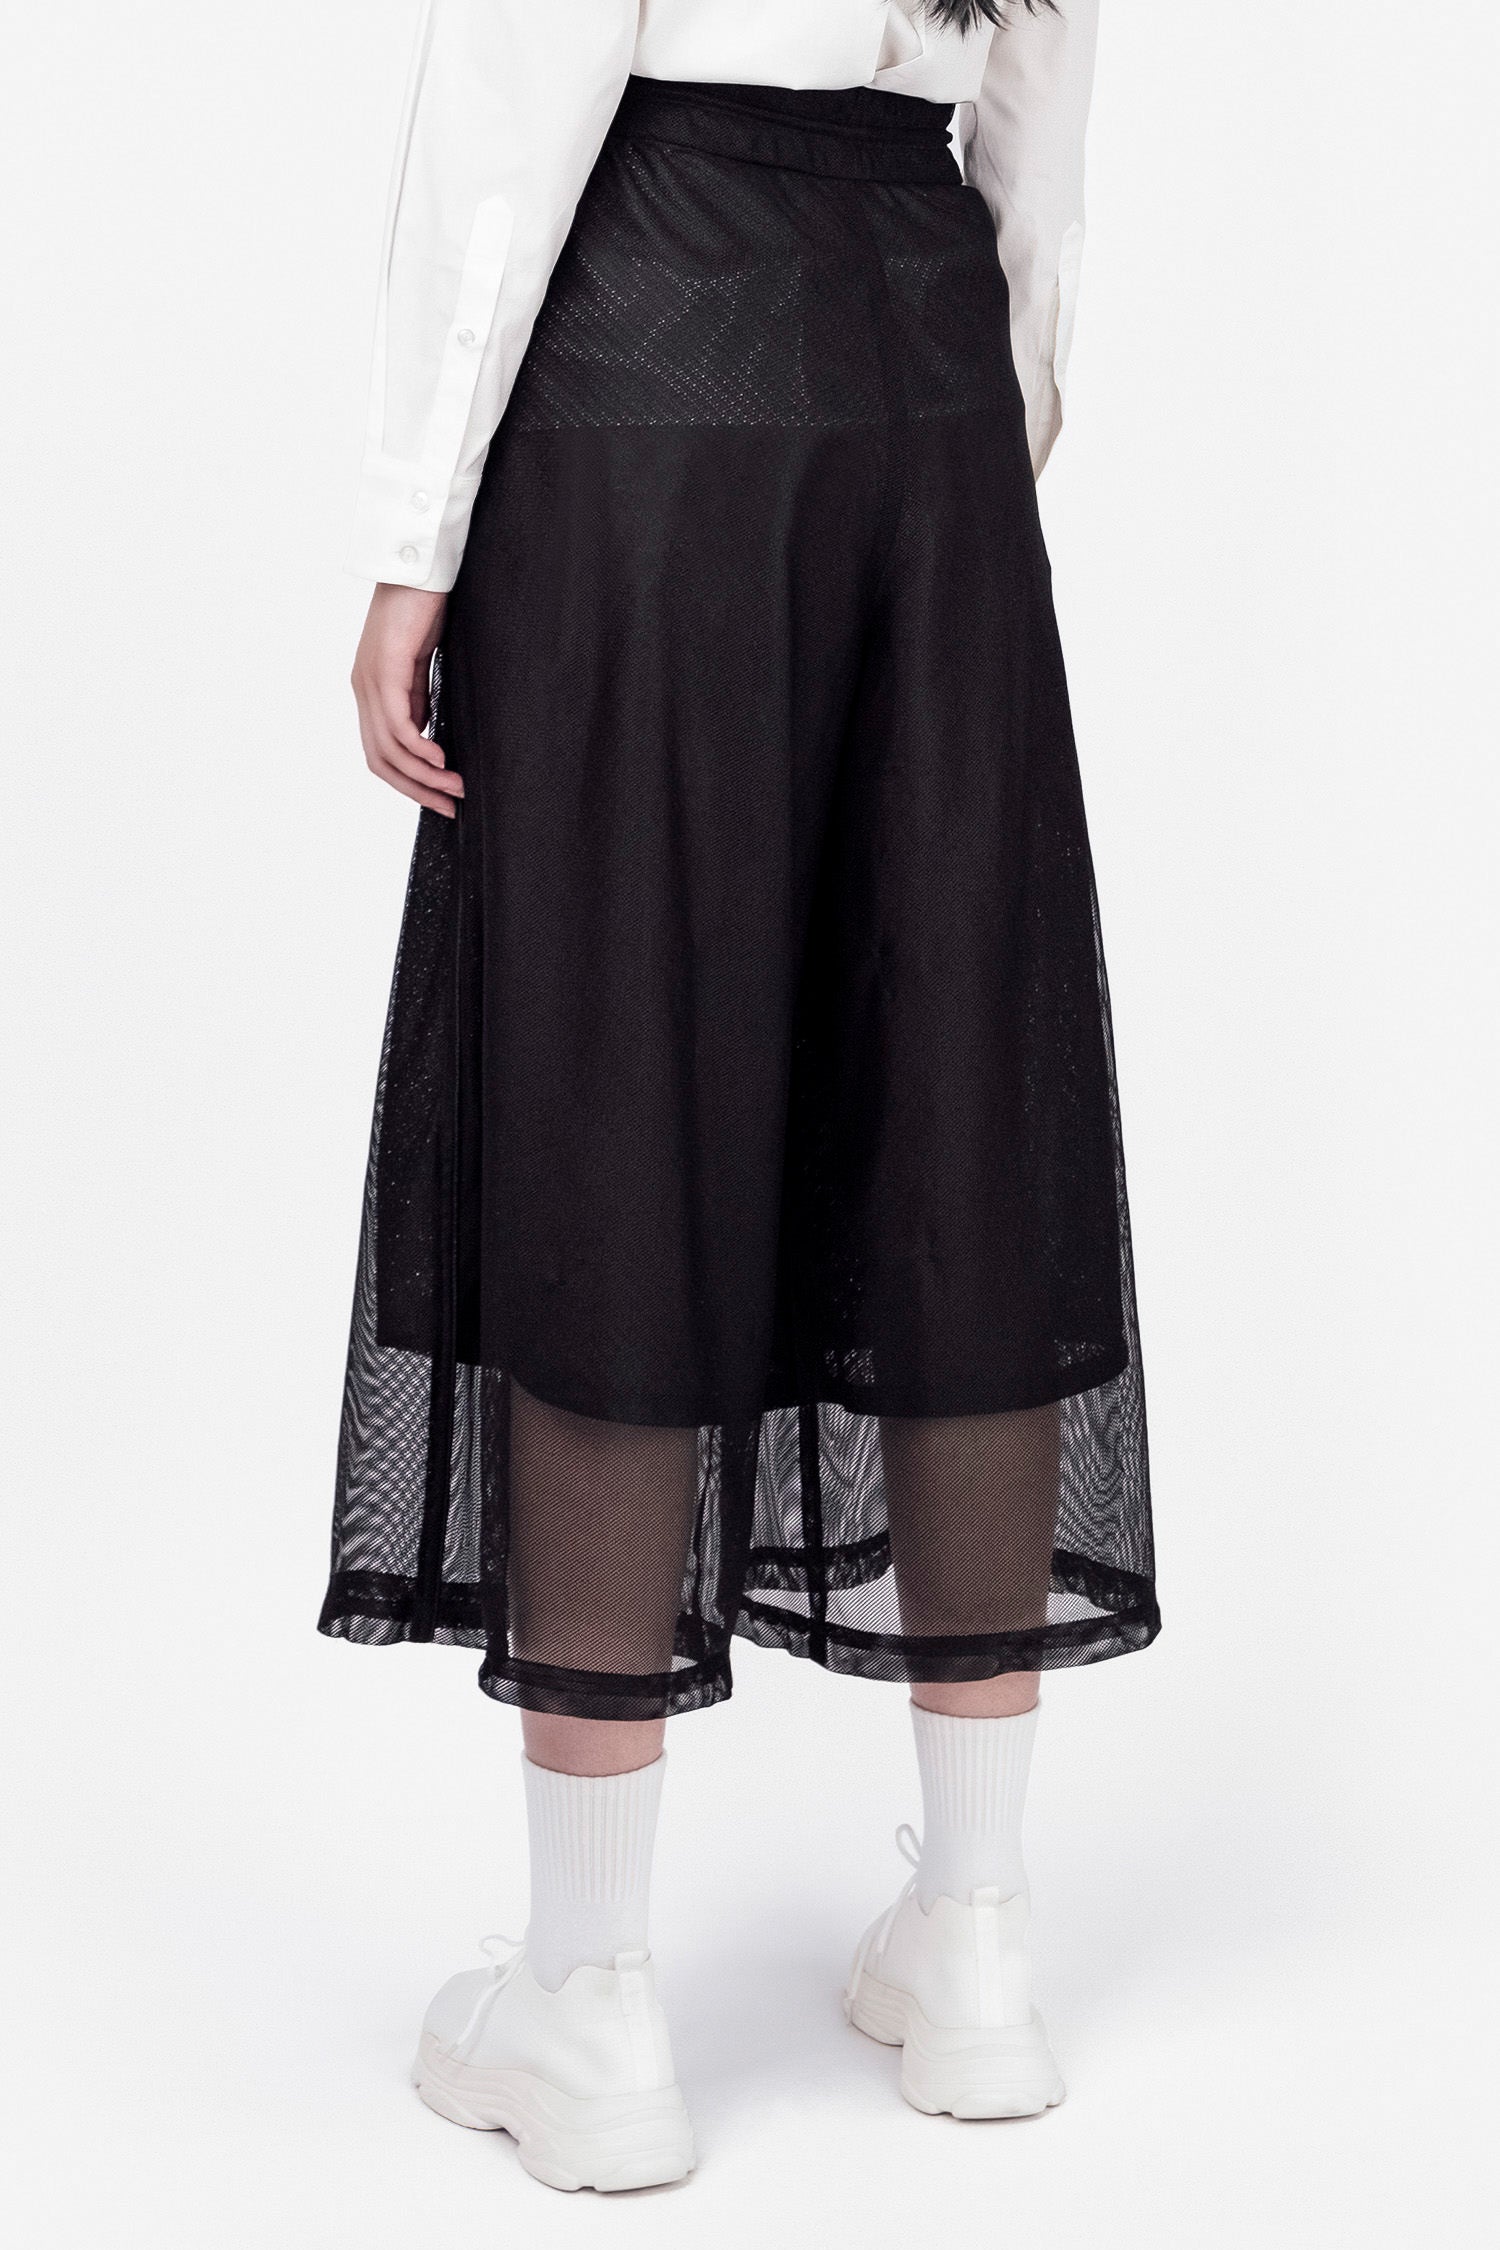 SEANNUNG - 雙層網寬管褲 Double Layer Meshed Wide-leg Trousers - Woman